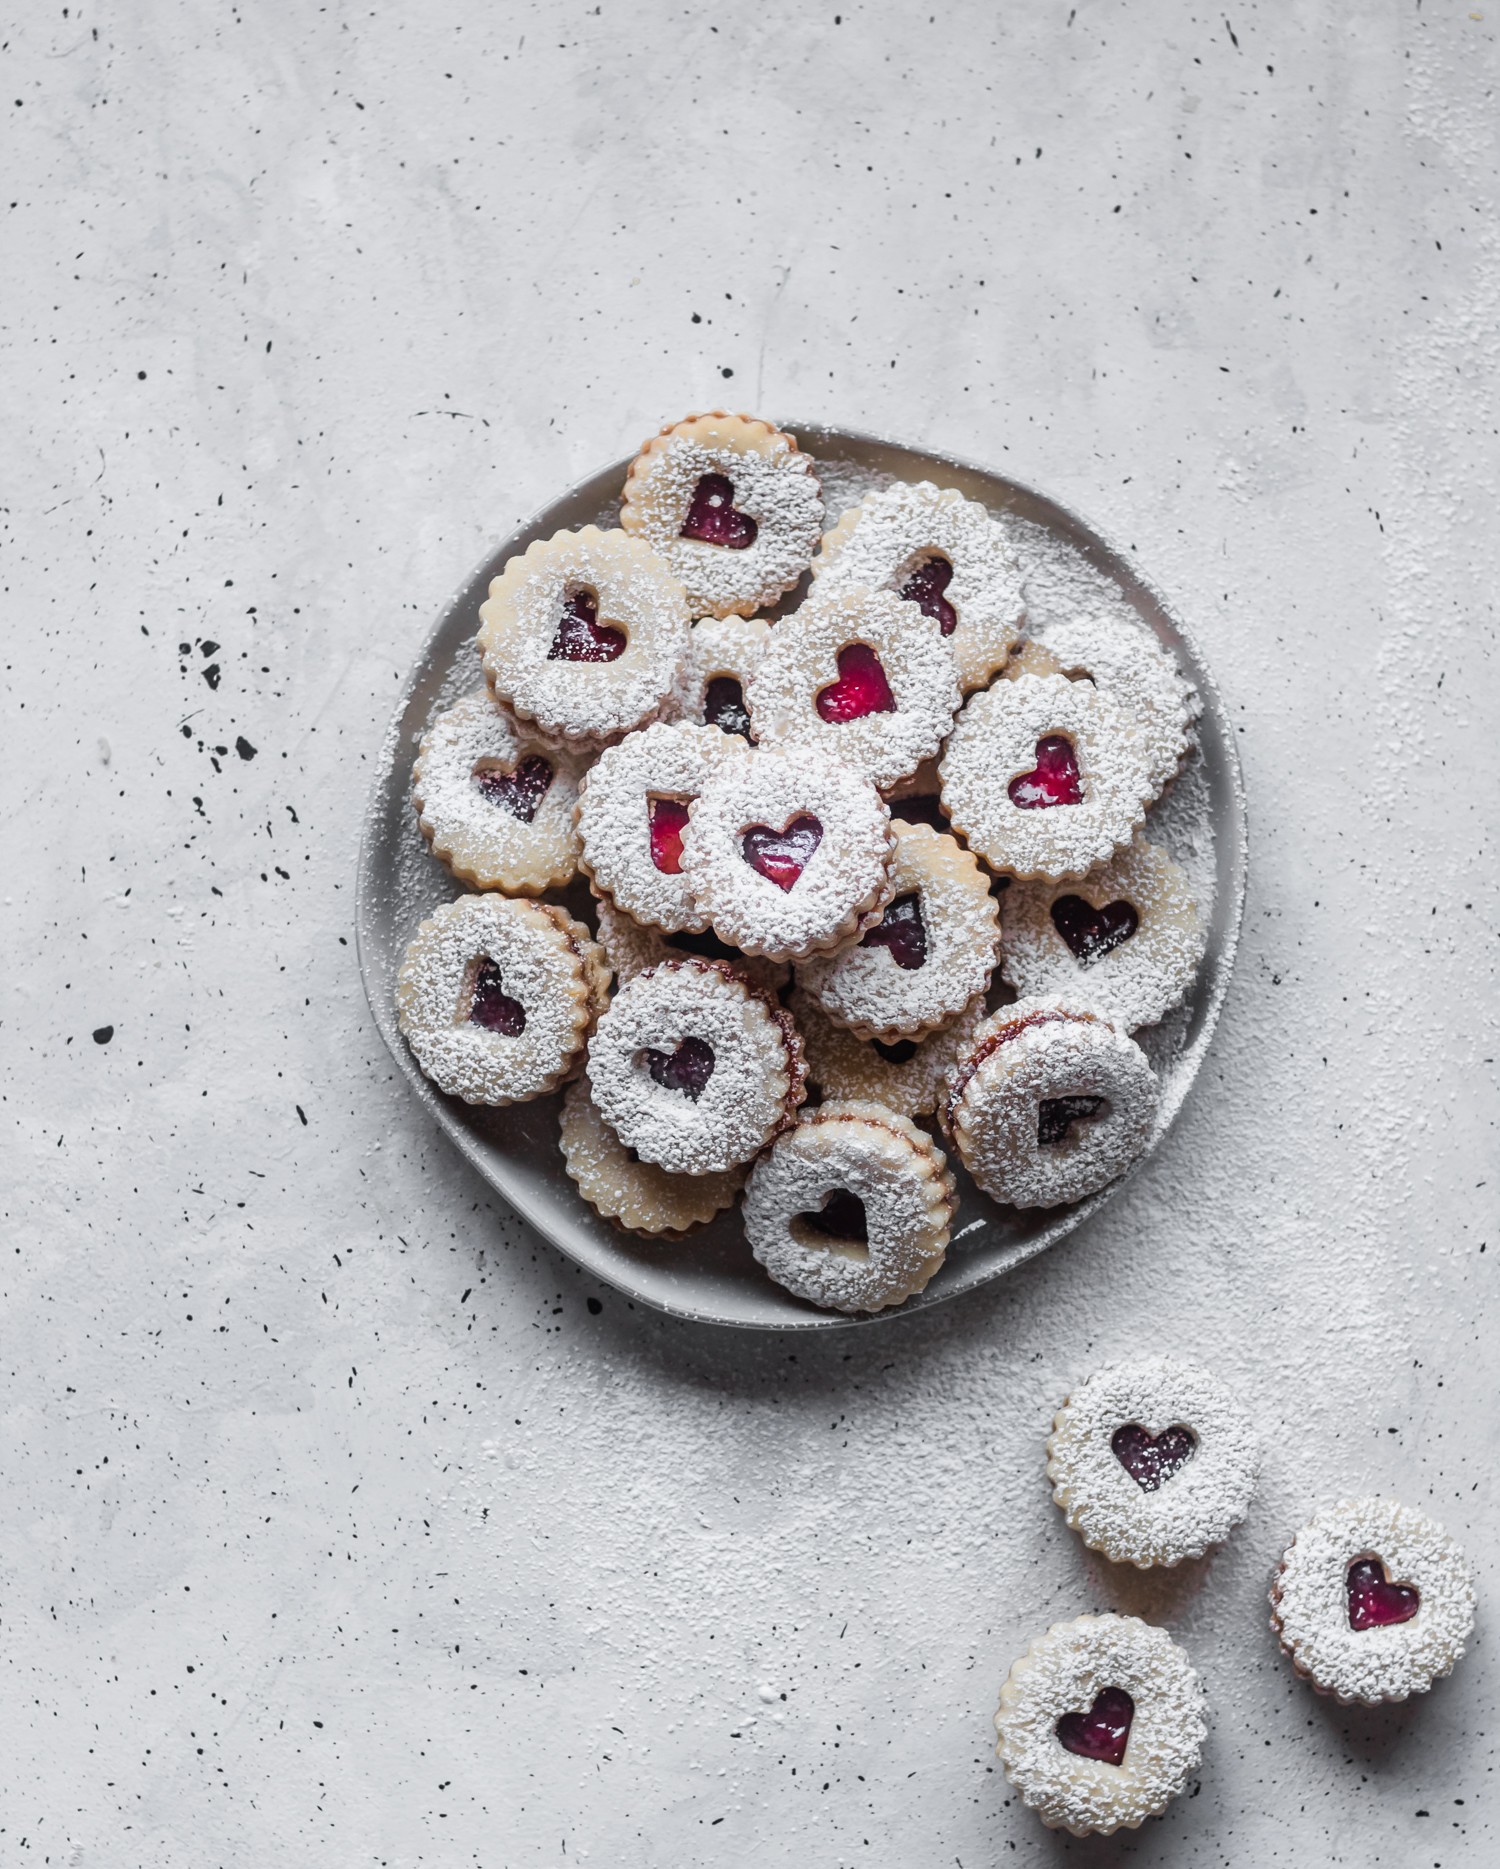 A white plate of raspberry heart cookies on a speckled background.